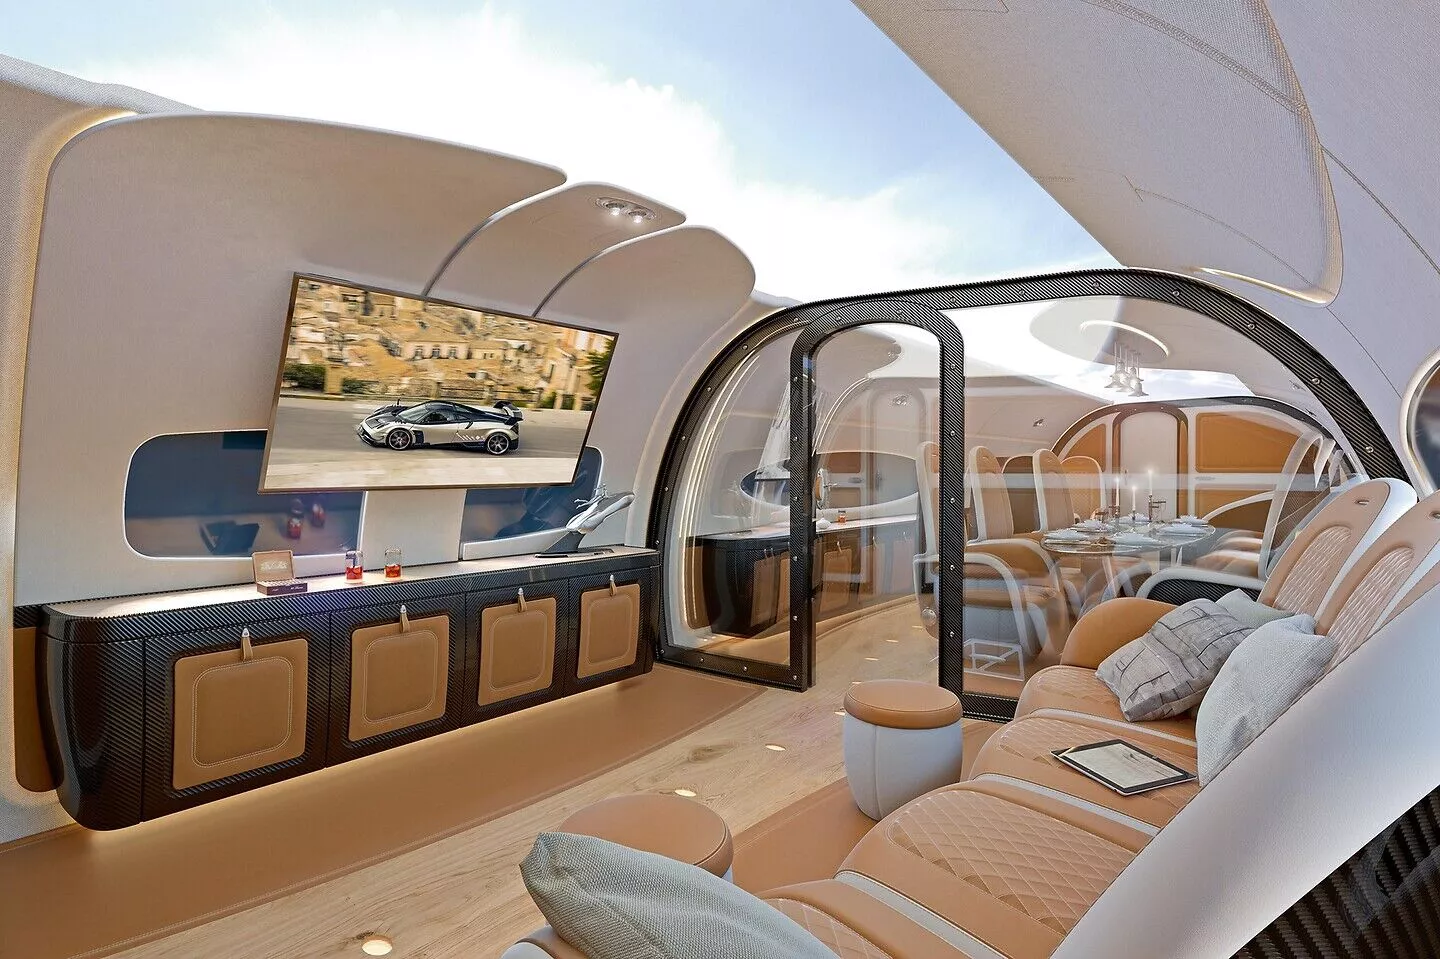 A Concept view of the cabin ACJ320 NEO